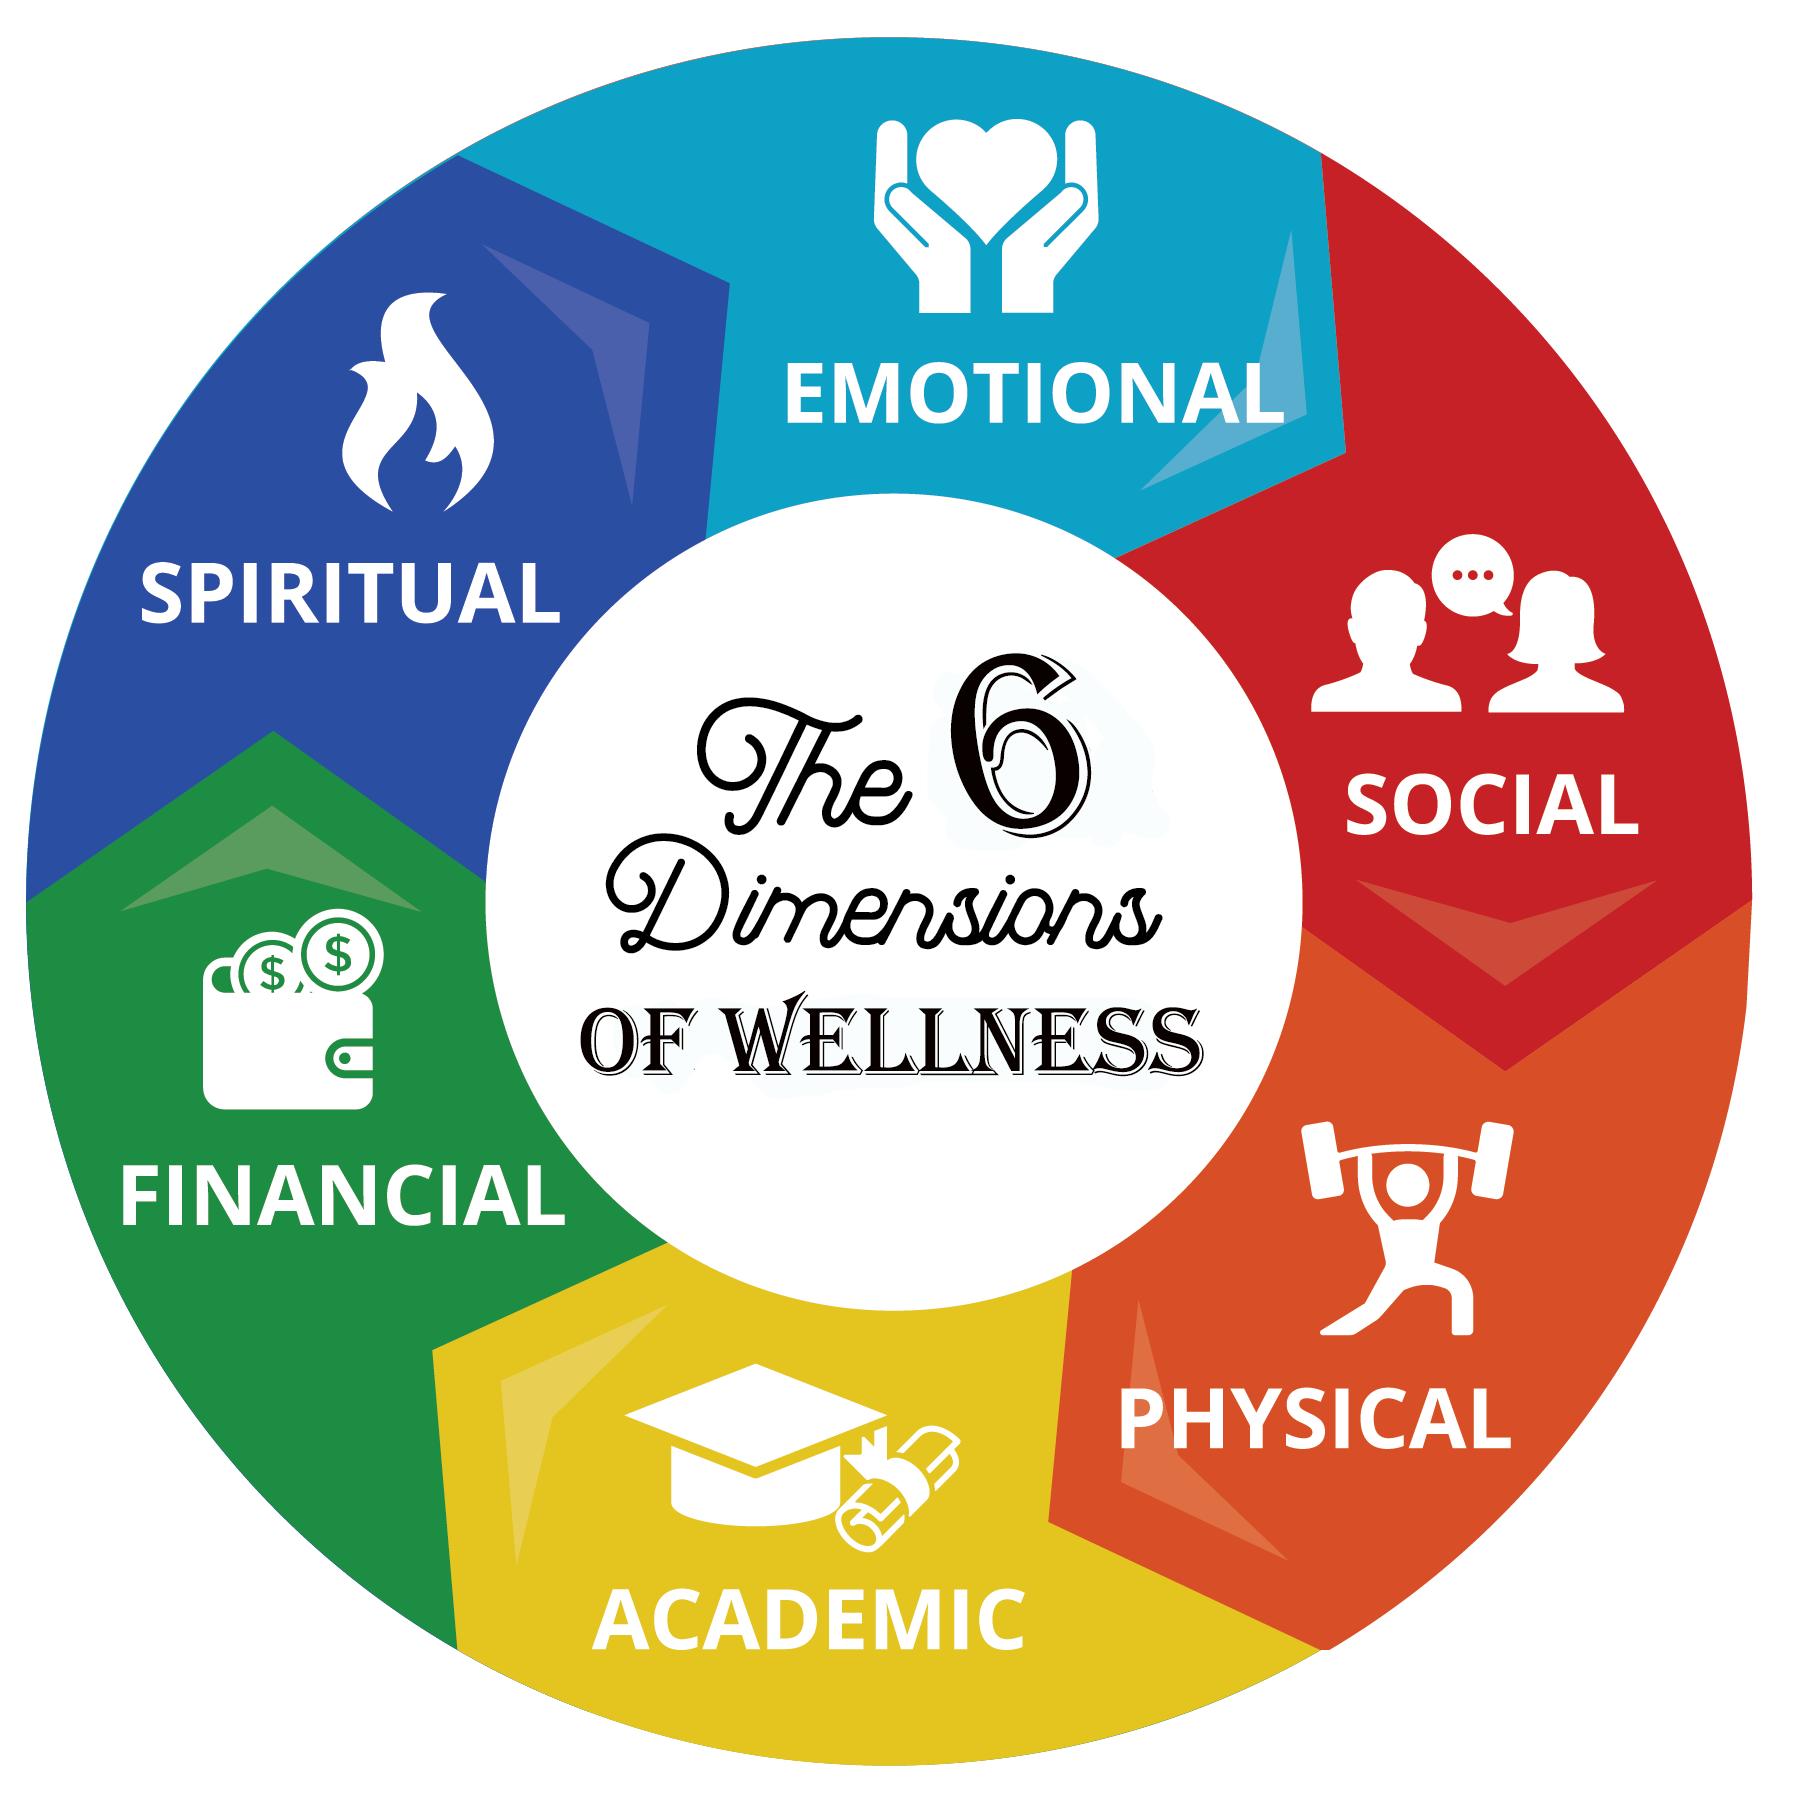 The 6 dimensions of Wellness